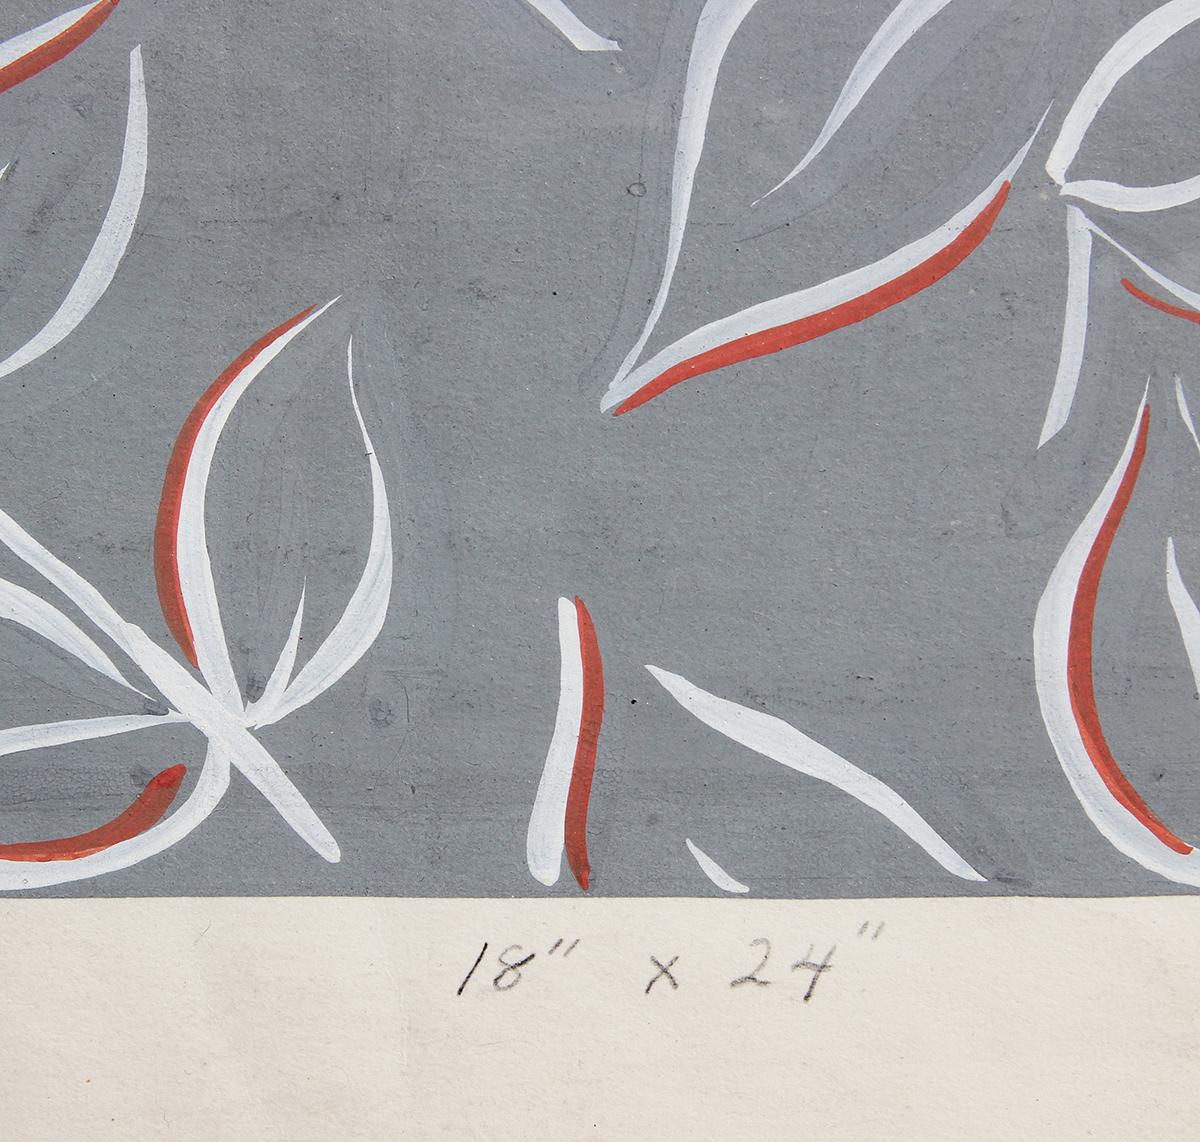 Modern grey and white geometric abstract leaf pattern composition with orange accents by textile designer John Little. The work was created as a proposed design for a wallpaper and features the original color codes in the front lower left corner.